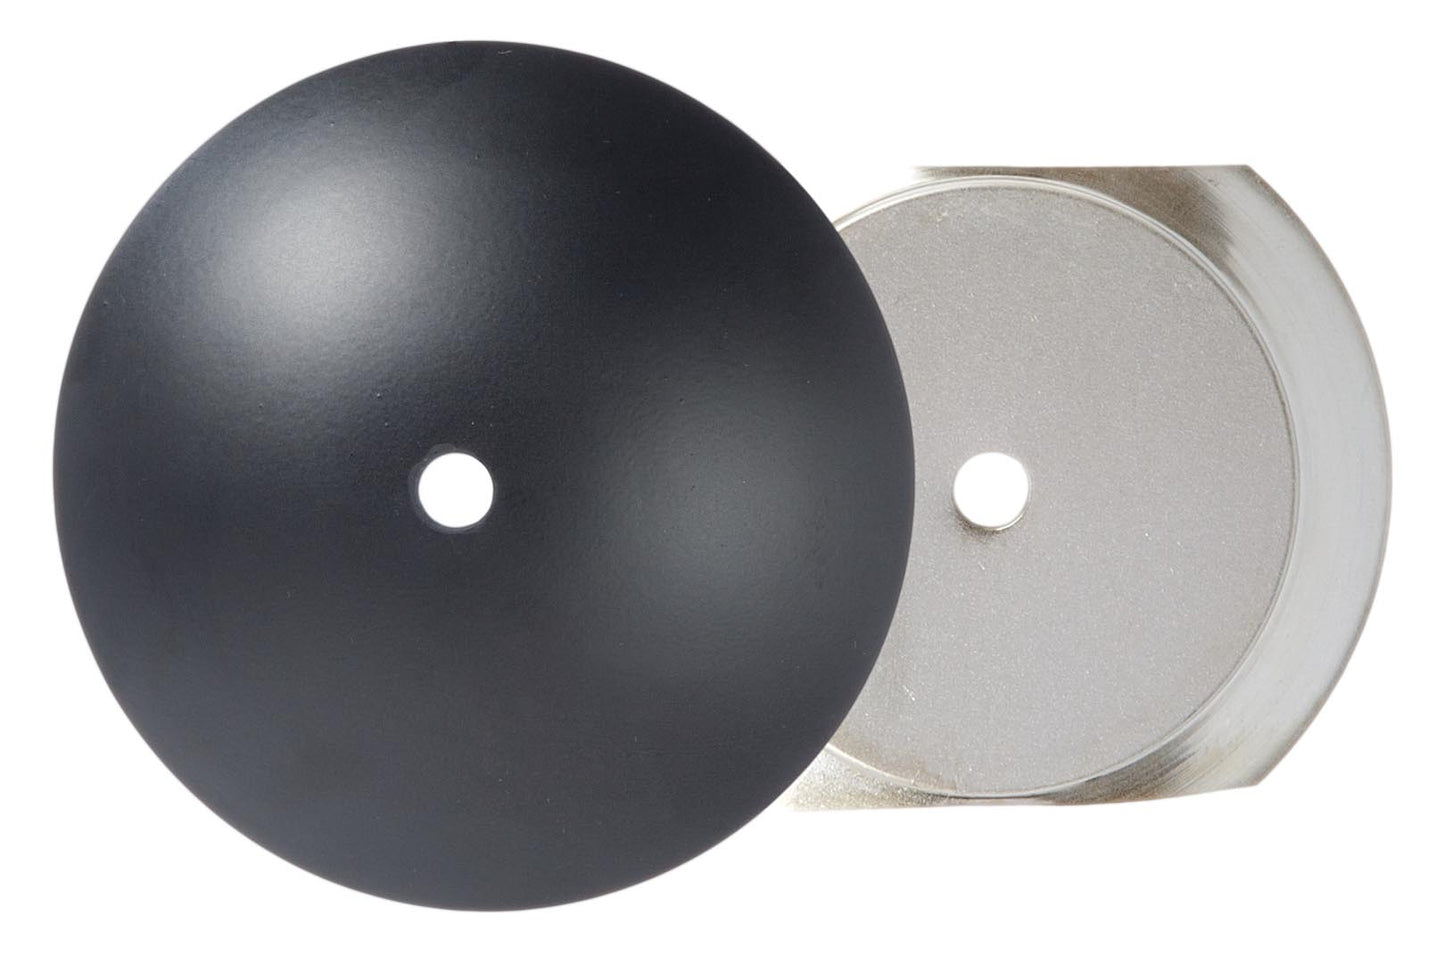 2-Piece Neckless Ball Shade Holders, Satin Black Finish - Choice of Size